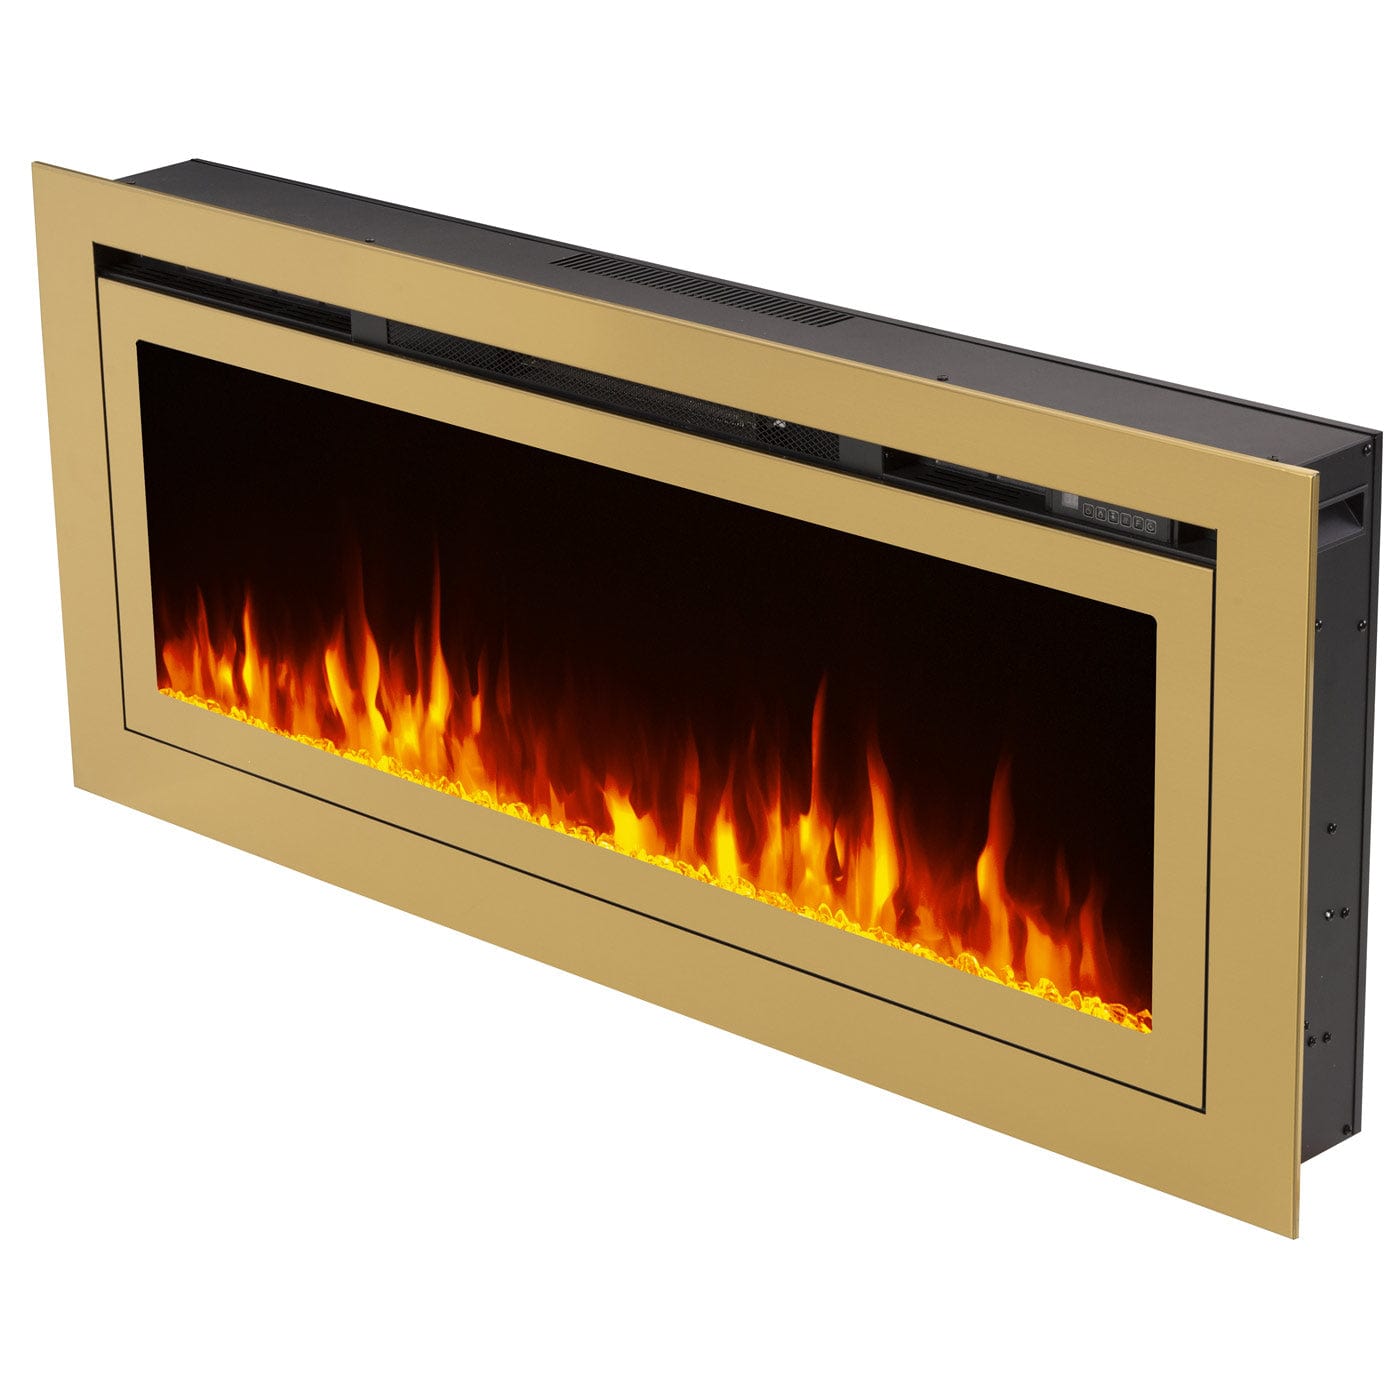 The Sideline Deluxe Gold 60 Inch 86276 Recessed Smart Electric Fireplace angled. 